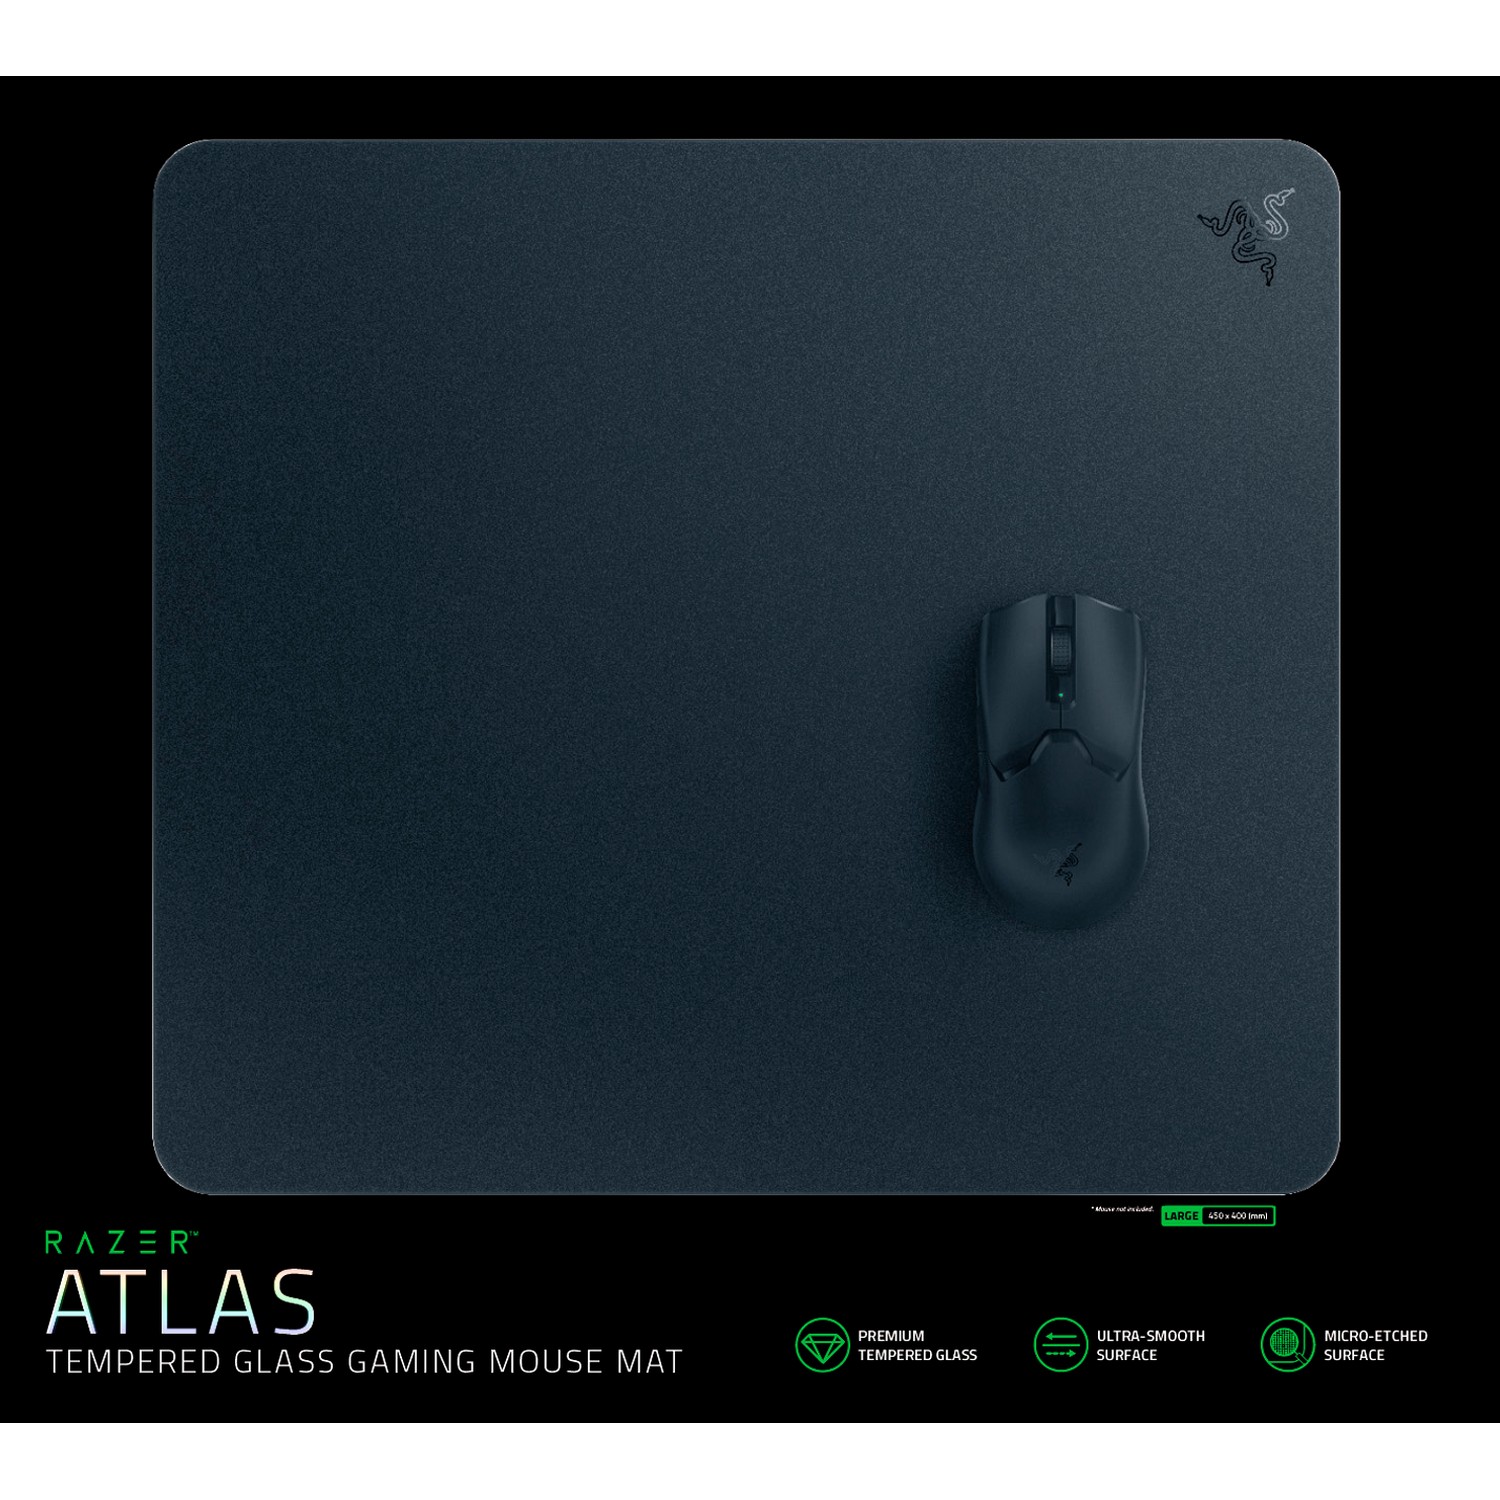 Razer Atlas Tempered Glass Gaming Mouse Mat 450 X 400mm (17.72 x